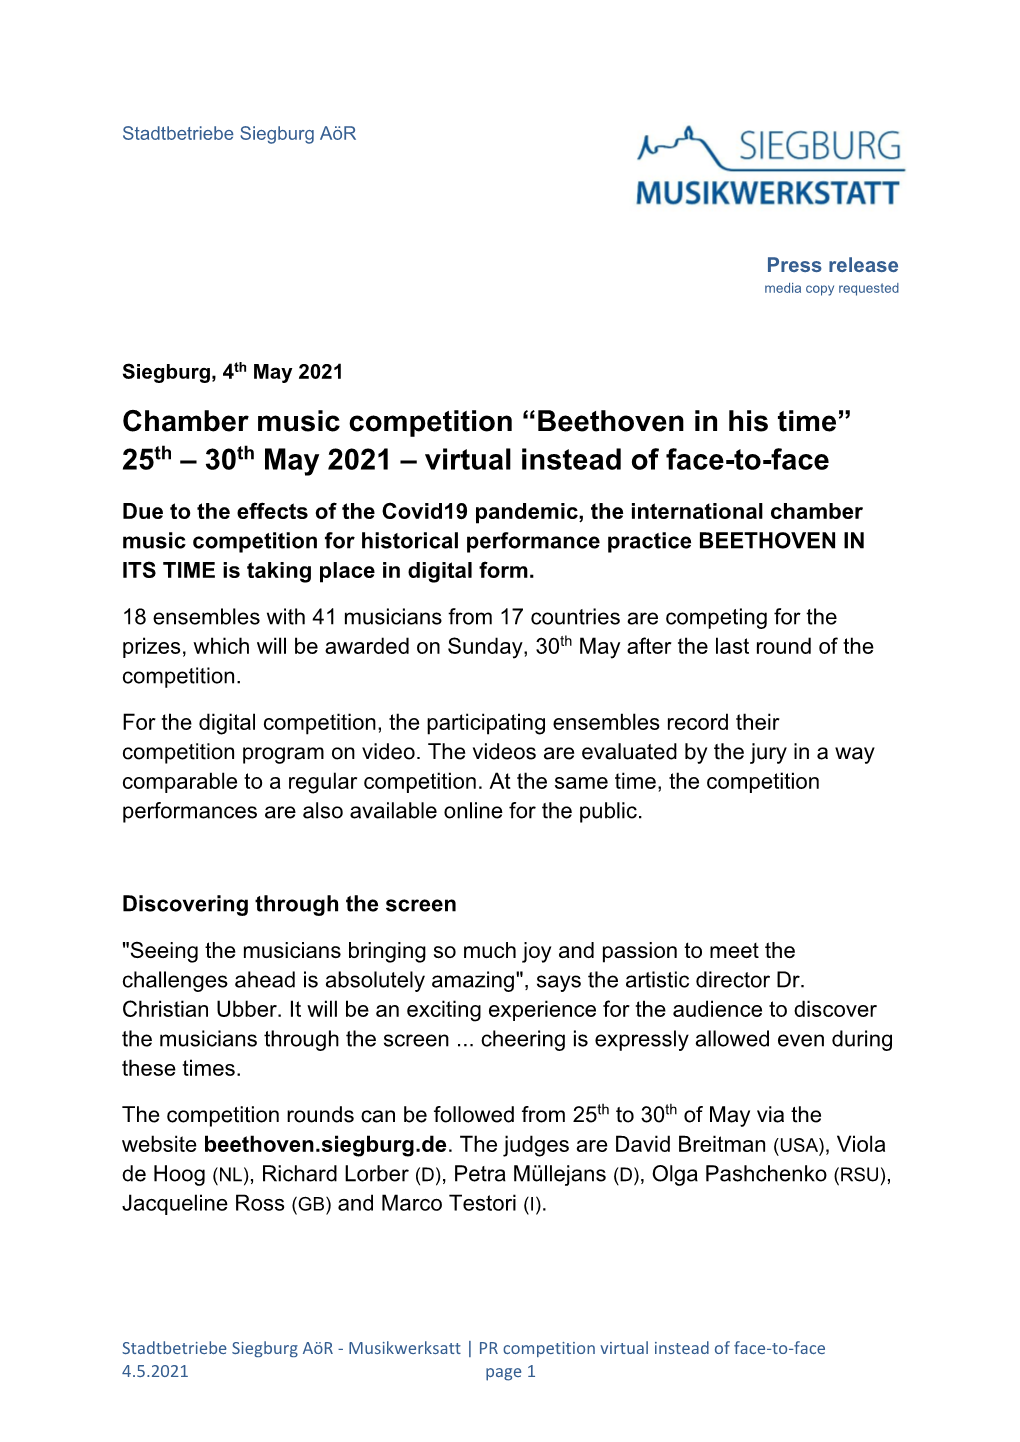 Chamber Music Competition “Beethoven in His Time” 25Th – 30Th May 2021 – Virtual Instead of Face-To-Face